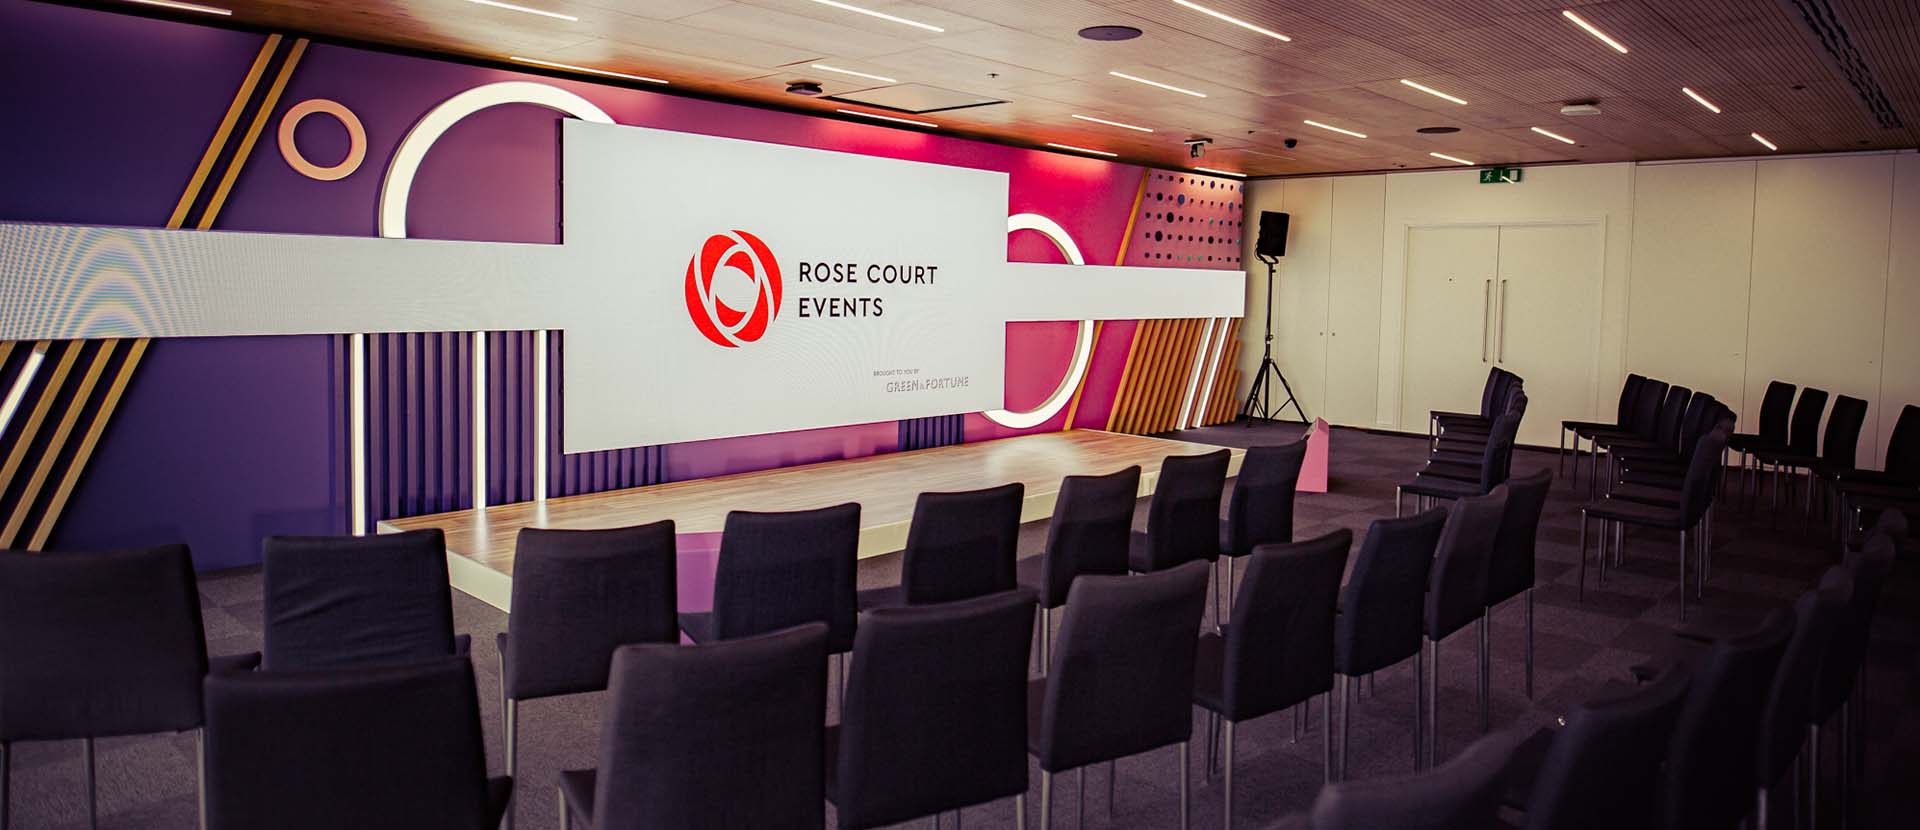 Rose Court launch event seating and stage